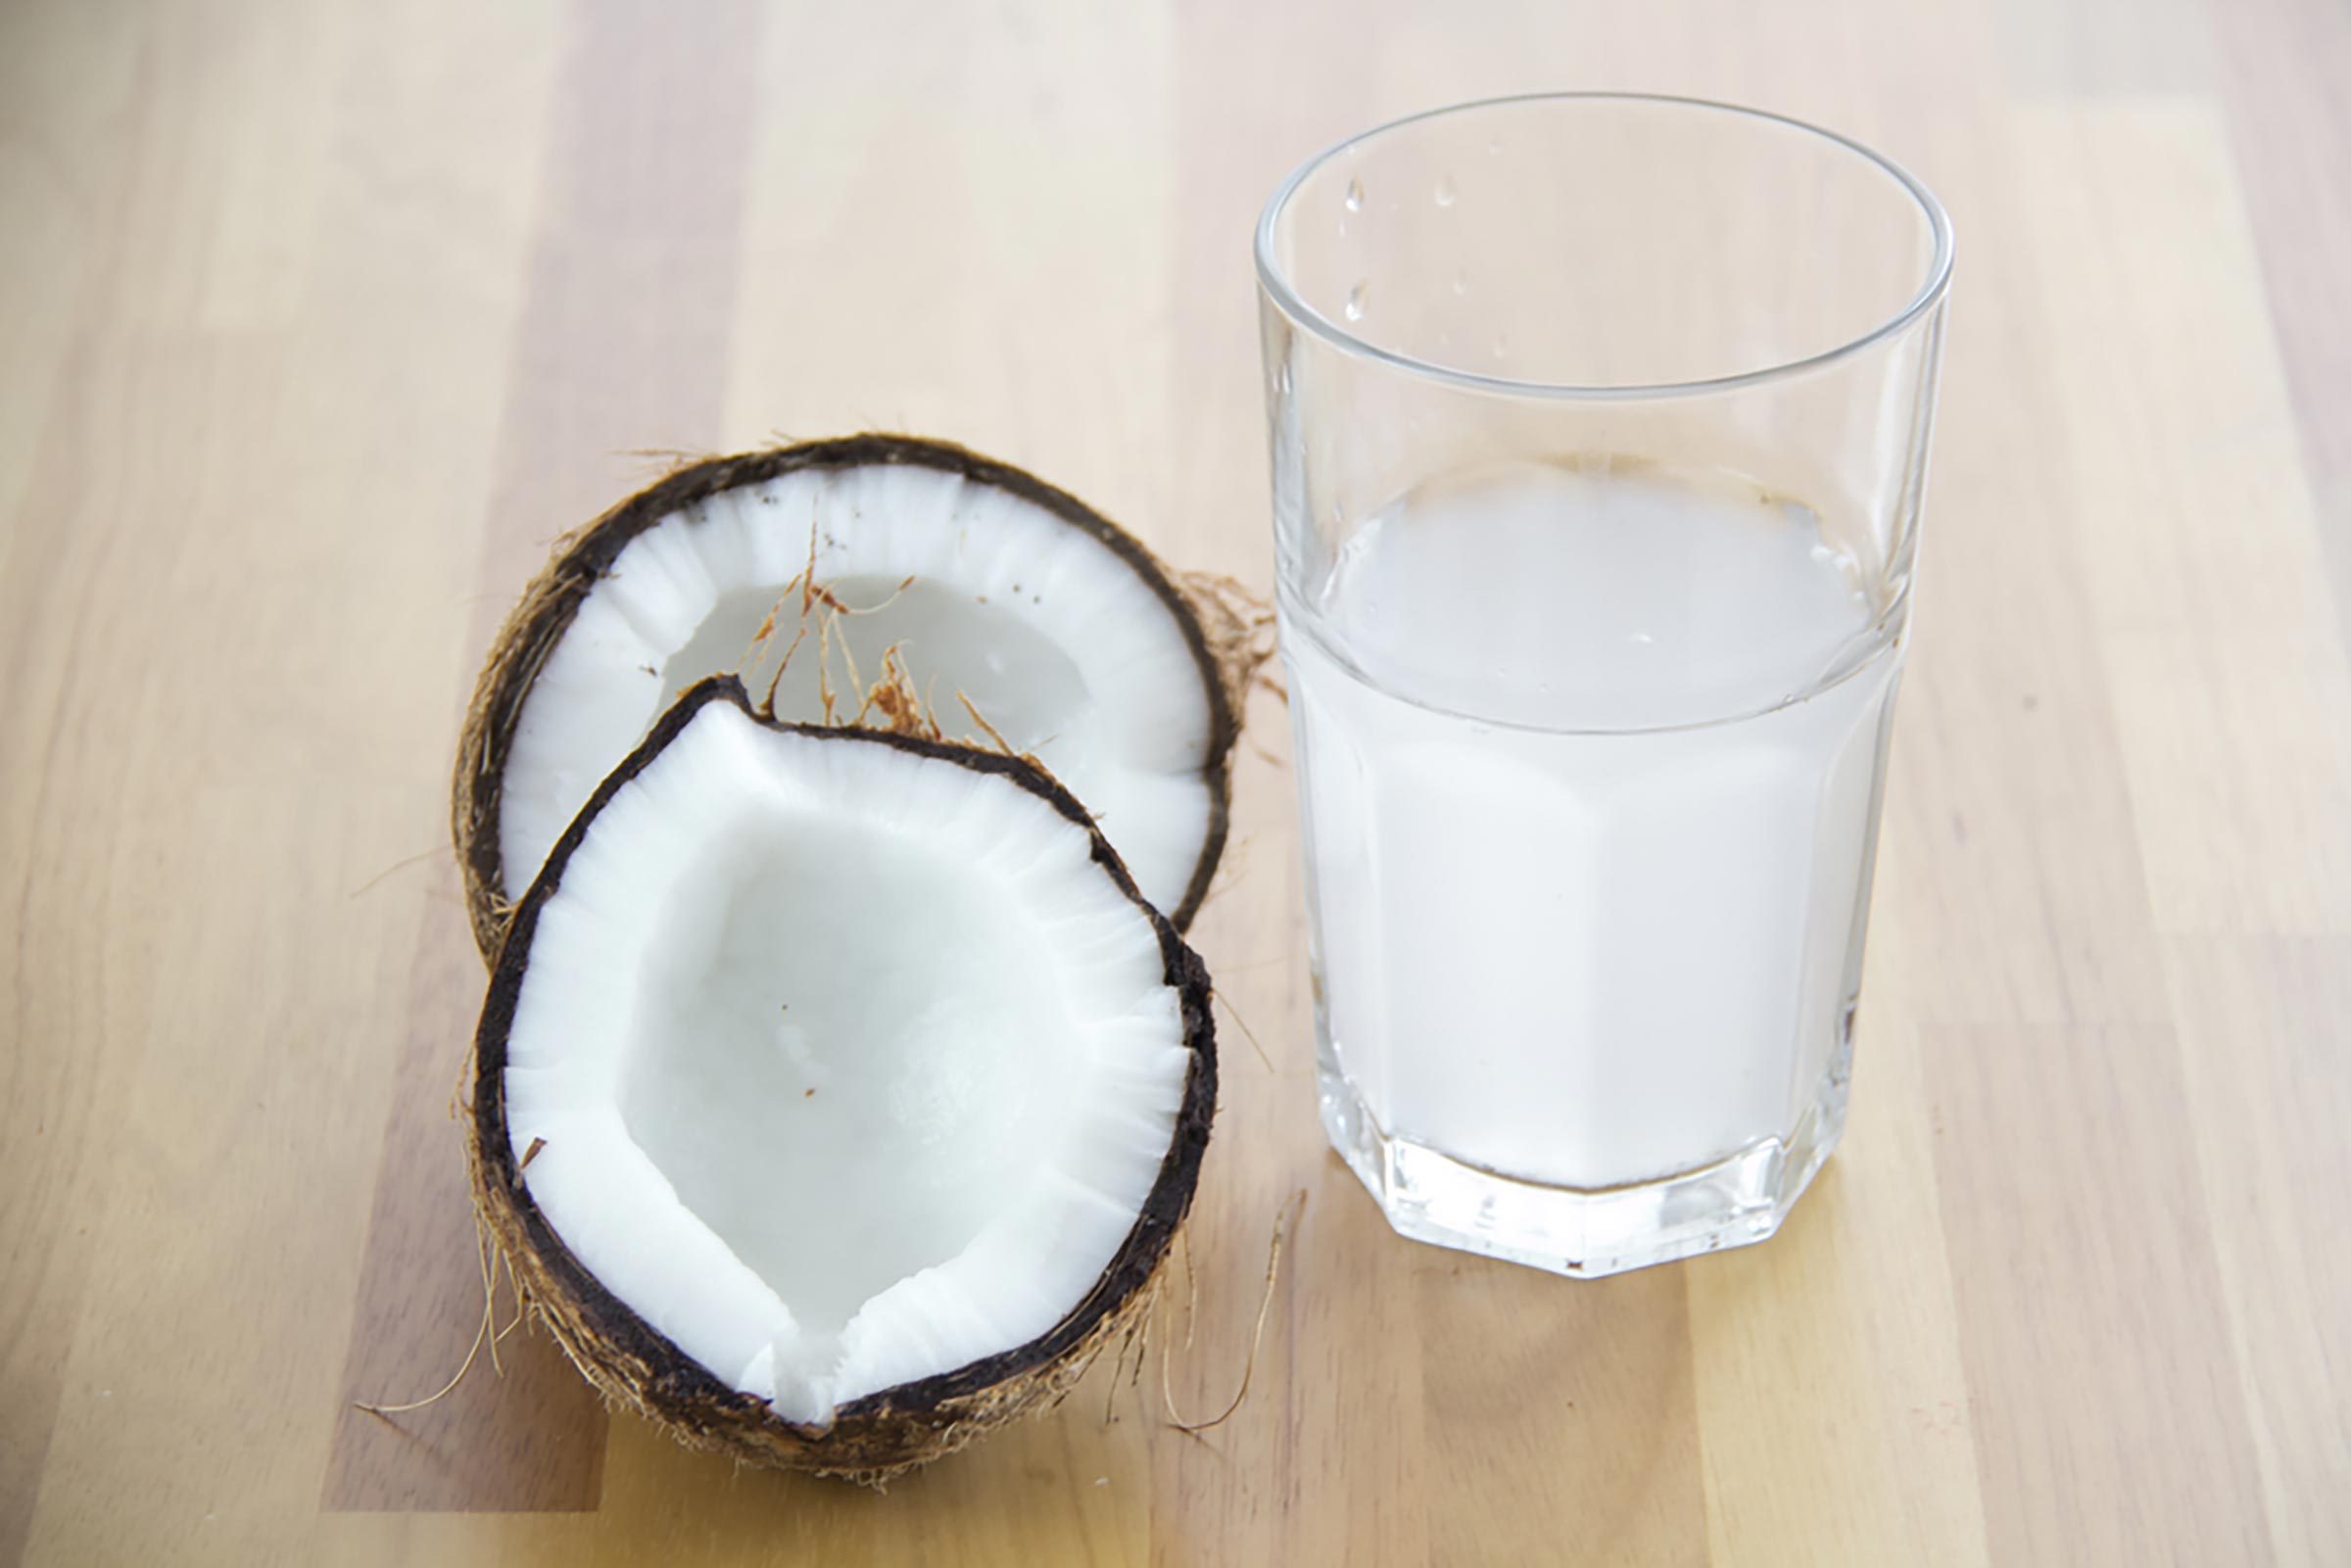 Glass of coconut water next to two halves of a coconut